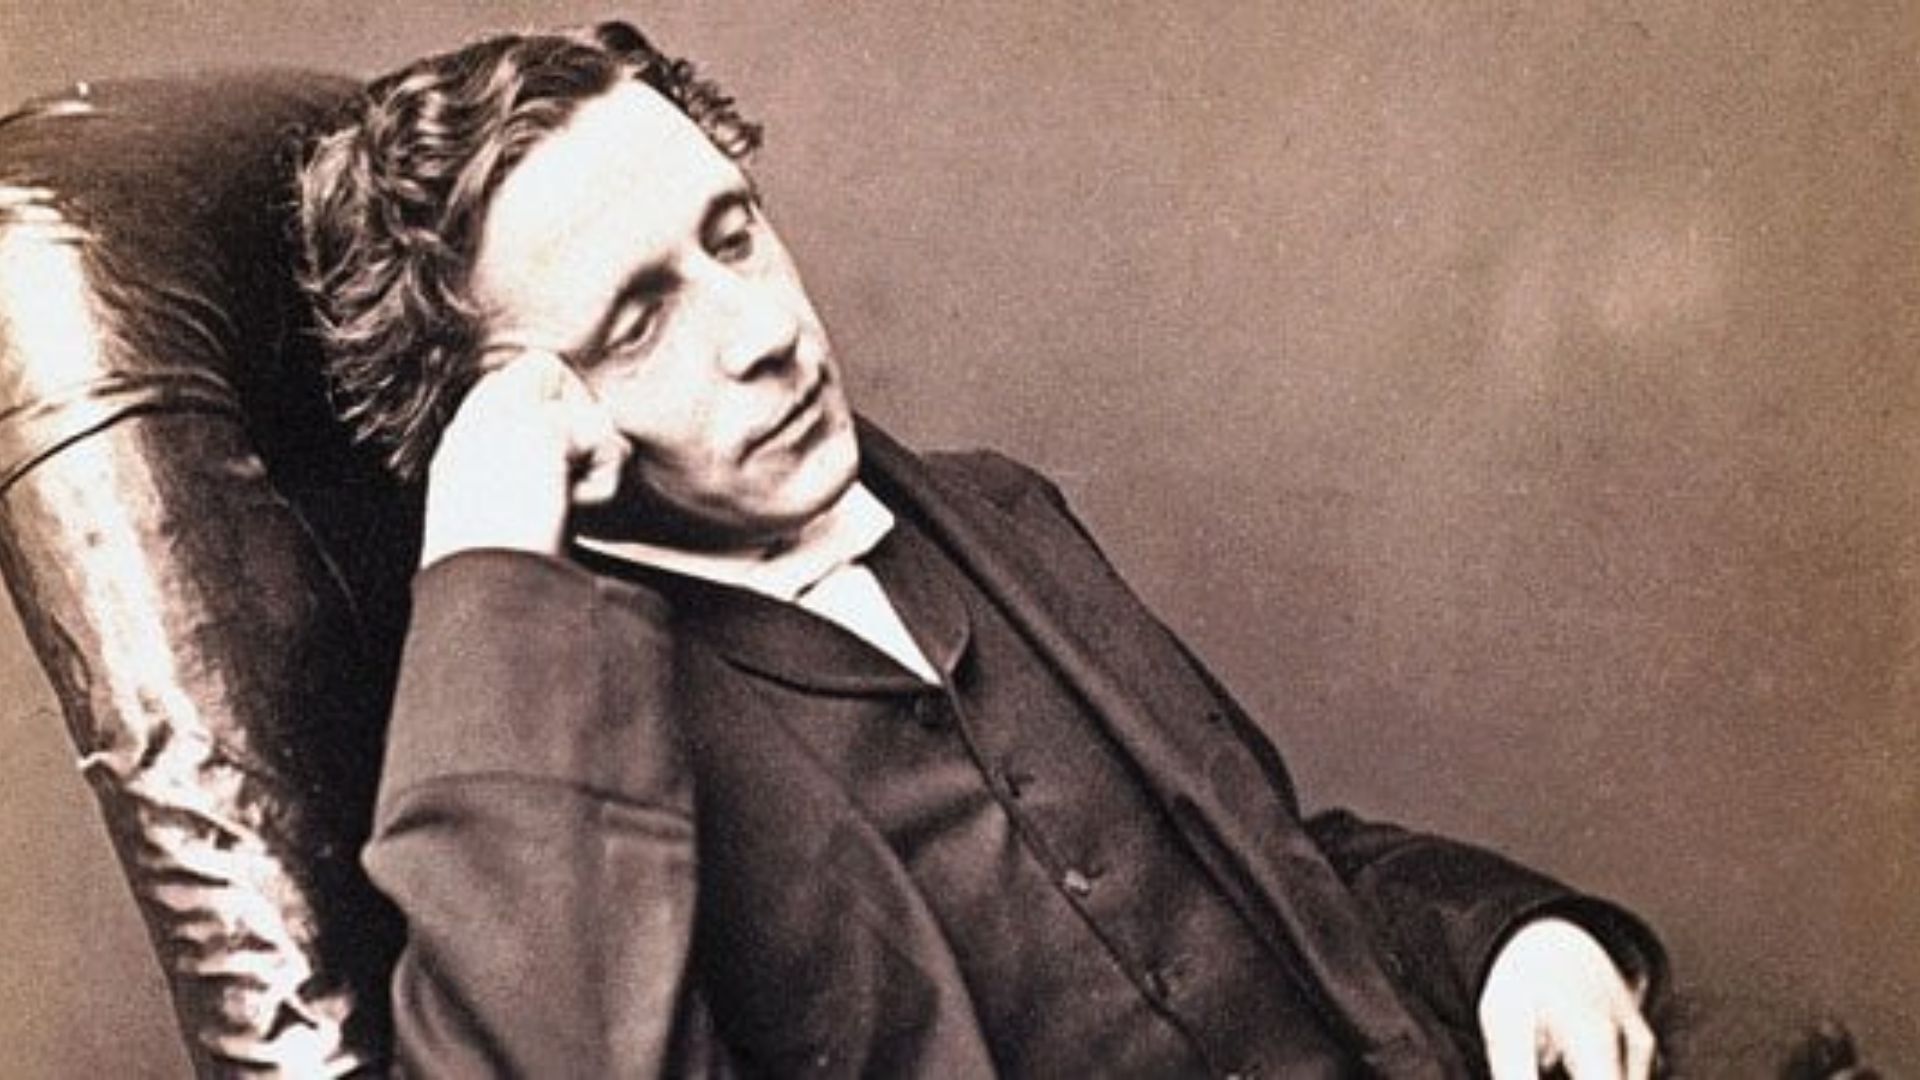 Lewis Carroll Leaning On A Chair